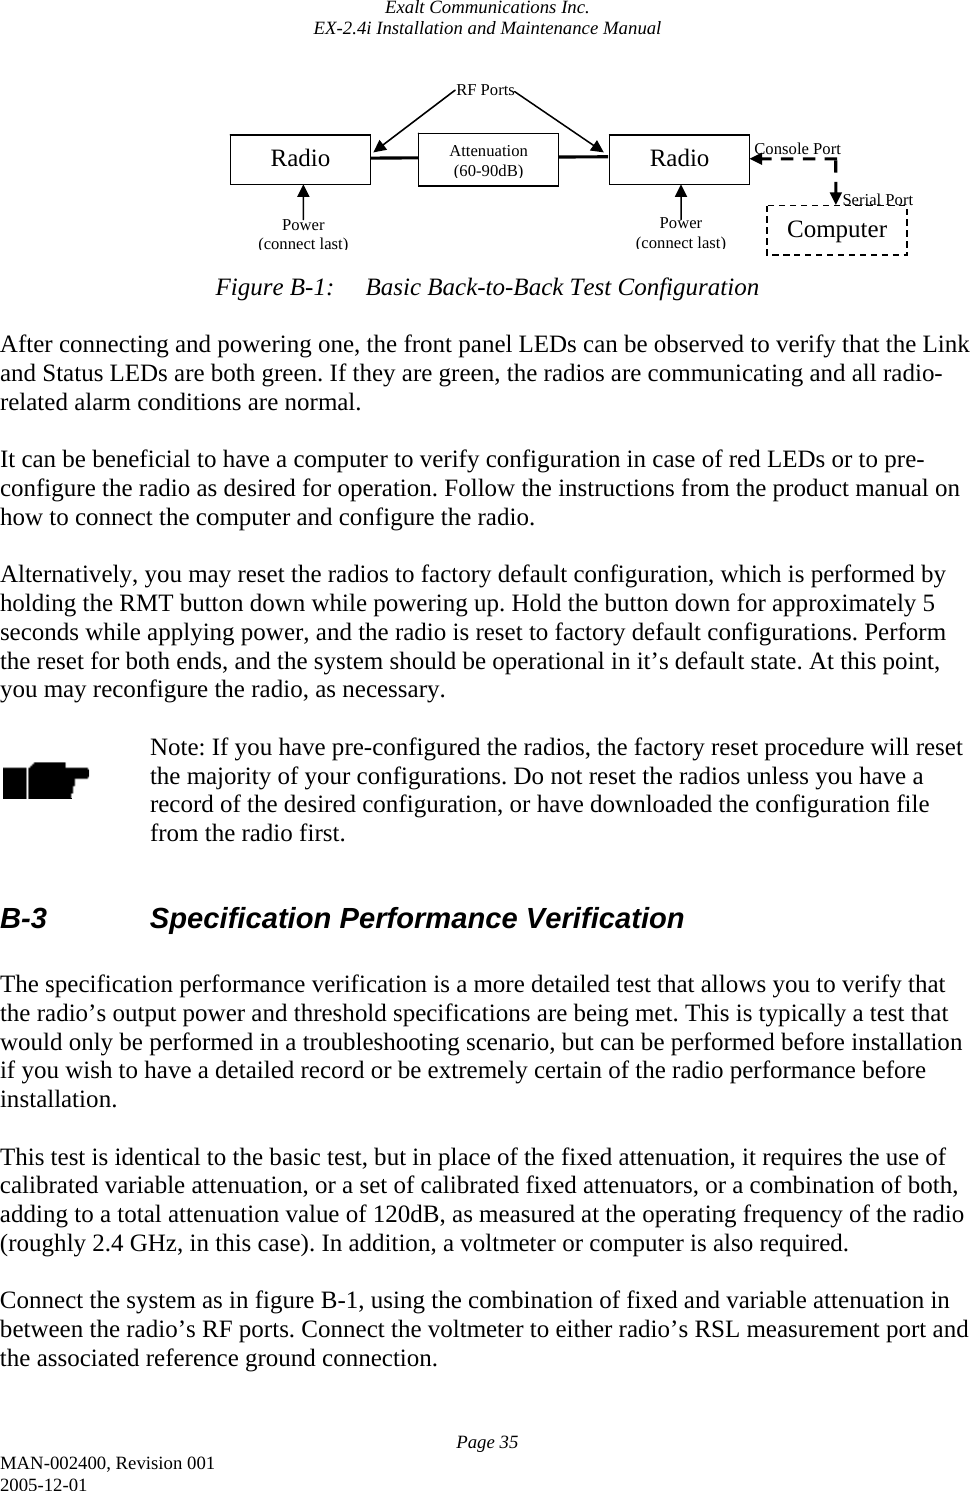 Exalt Communications Inc. EX-2.4i Installation and Maintenance Manual Page 35 MAN-002400, Revision 001 2005-12-01        Figure B-1:  Basic Back-to-Back Test Configuration  After connecting and powering one, the front panel LEDs can be observed to verify that the Link and Status LEDs are both green. If they are green, the radios are communicating and all radio-related alarm conditions are normal.  It can be beneficial to have a computer to verify configuration in case of red LEDs or to pre-configure the radio as desired for operation. Follow the instructions from the product manual on how to connect the computer and configure the radio.  Alternatively, you may reset the radios to factory default configuration, which is performed by holding the RMT button down while powering up. Hold the button down for approximately 5 seconds while applying power, and the radio is reset to factory default configurations. Perform the reset for both ends, and the system should be operational in it’s default state. At this point, you may reconfigure the radio, as necessary.  Note: If you have pre-configured the radios, the factory reset procedure will reset the majority of your configurations. Do not reset the radios unless you have a record of the desired configuration, or have downloaded the configuration file from the radio first.  B-3    Specification Performance Verification  The specification performance verification is a more detailed test that allows you to verify that the radio’s output power and threshold specifications are being met. This is typically a test that would only be performed in a troubleshooting scenario, but can be performed before installation if you wish to have a detailed record or be extremely certain of the radio performance before installation.  This test is identical to the basic test, but in place of the fixed attenuation, it requires the use of calibrated variable attenuation, or a set of calibrated fixed attenuators, or a combination of both, adding to a total attenuation value of 120dB, as measured at the operating frequency of the radio (roughly 2.4 GHz, in this case). In addition, a voltmeter or computer is also required.   Connect the system as in figure B-1, using the combination of fixed and variable attenuation in between the radio’s RF ports. Connect the voltmeter to either radio’s RSL measurement port and the associated reference ground connection.  Radio  Radio Attenuation (60-90dB)RF Ports Power (connect last) Power (connect last)Computer Console Port Serial Port 